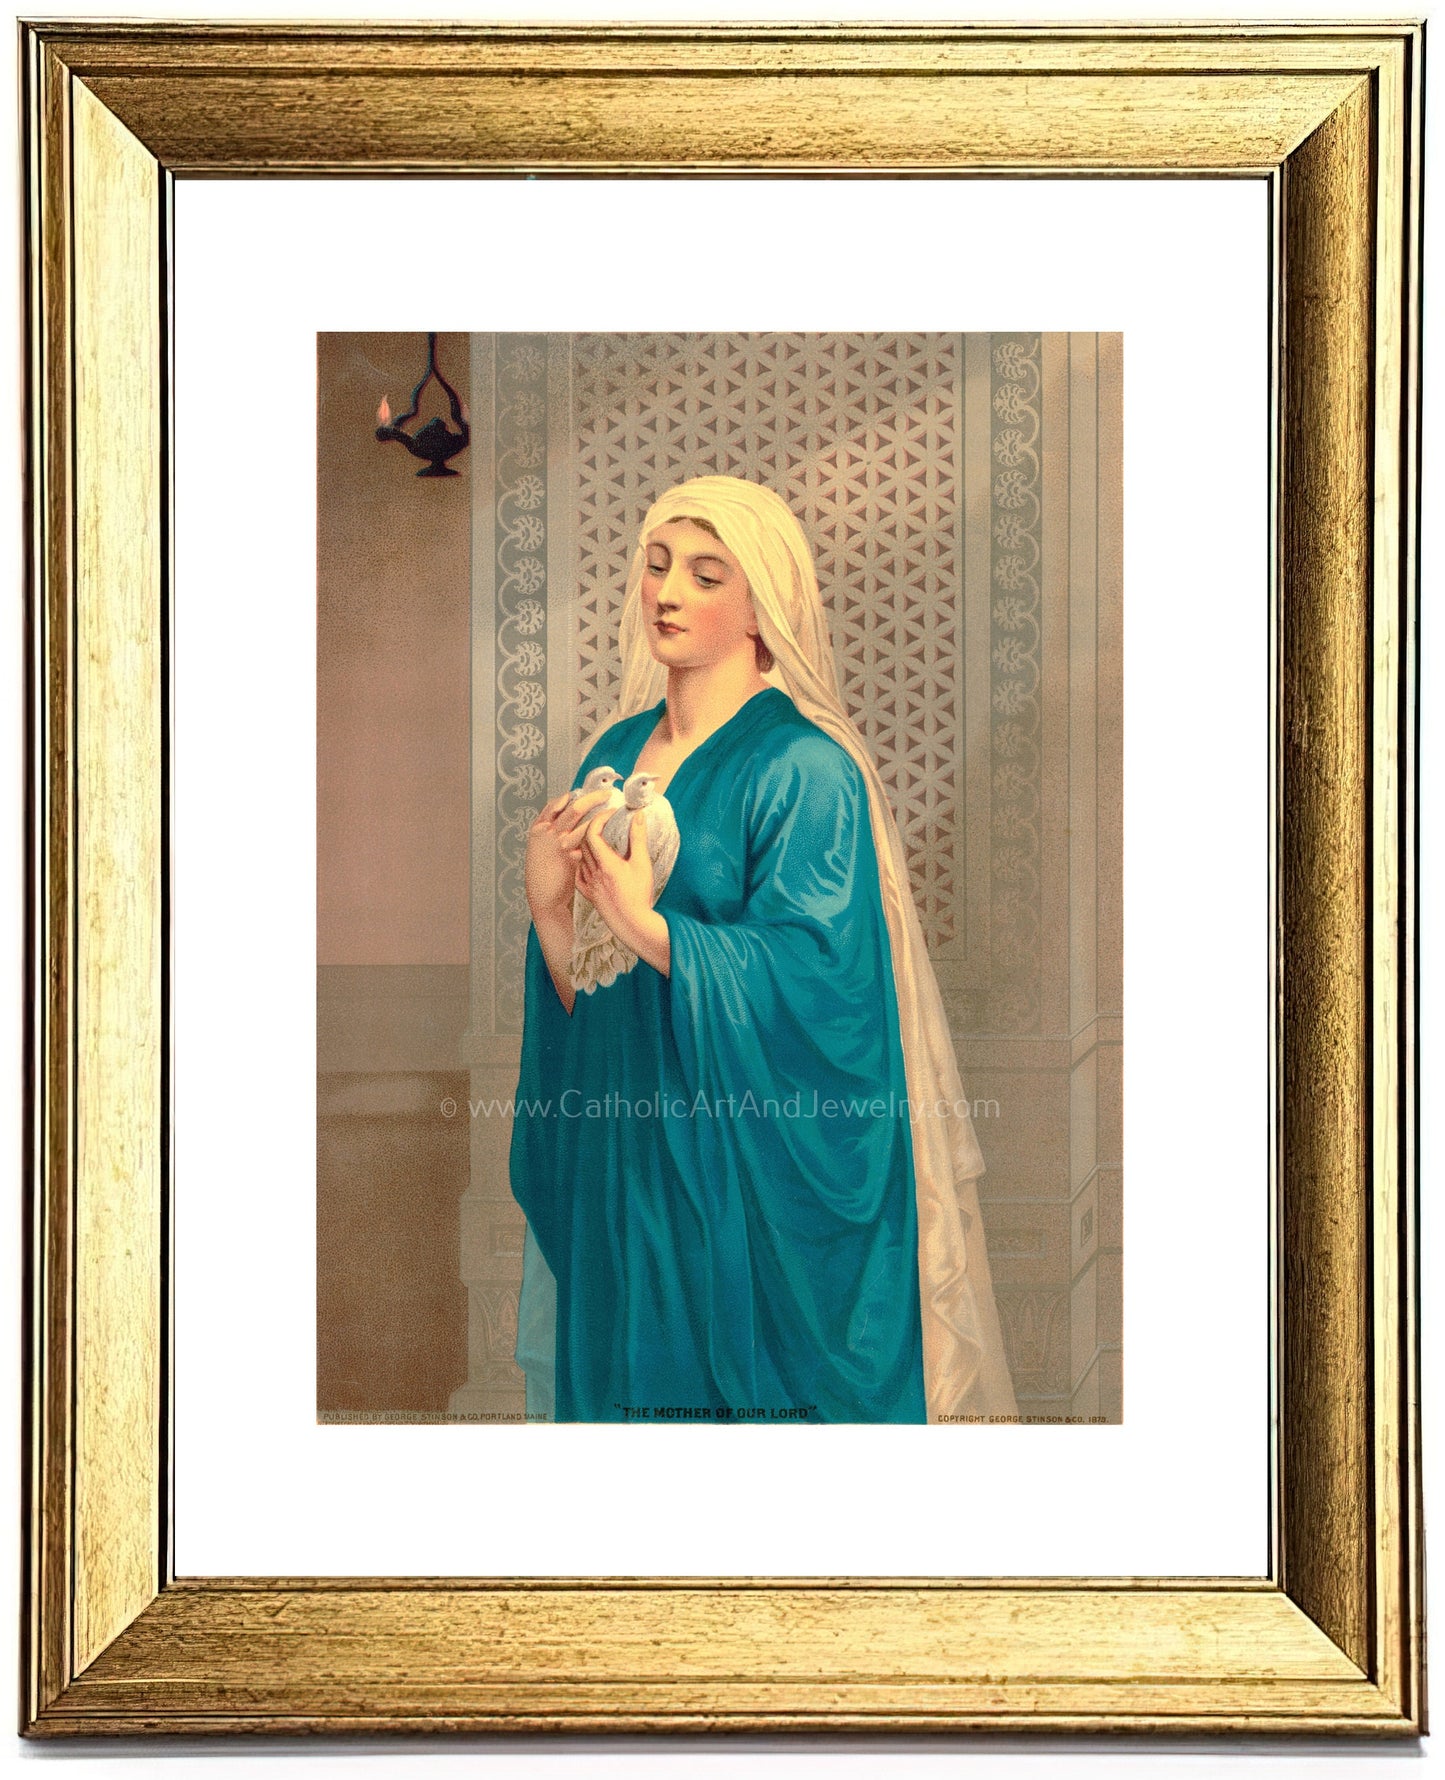 The Mother of Our Lord – Antique Catholic Print – Vintage Catholic Art Print – Archival Quality